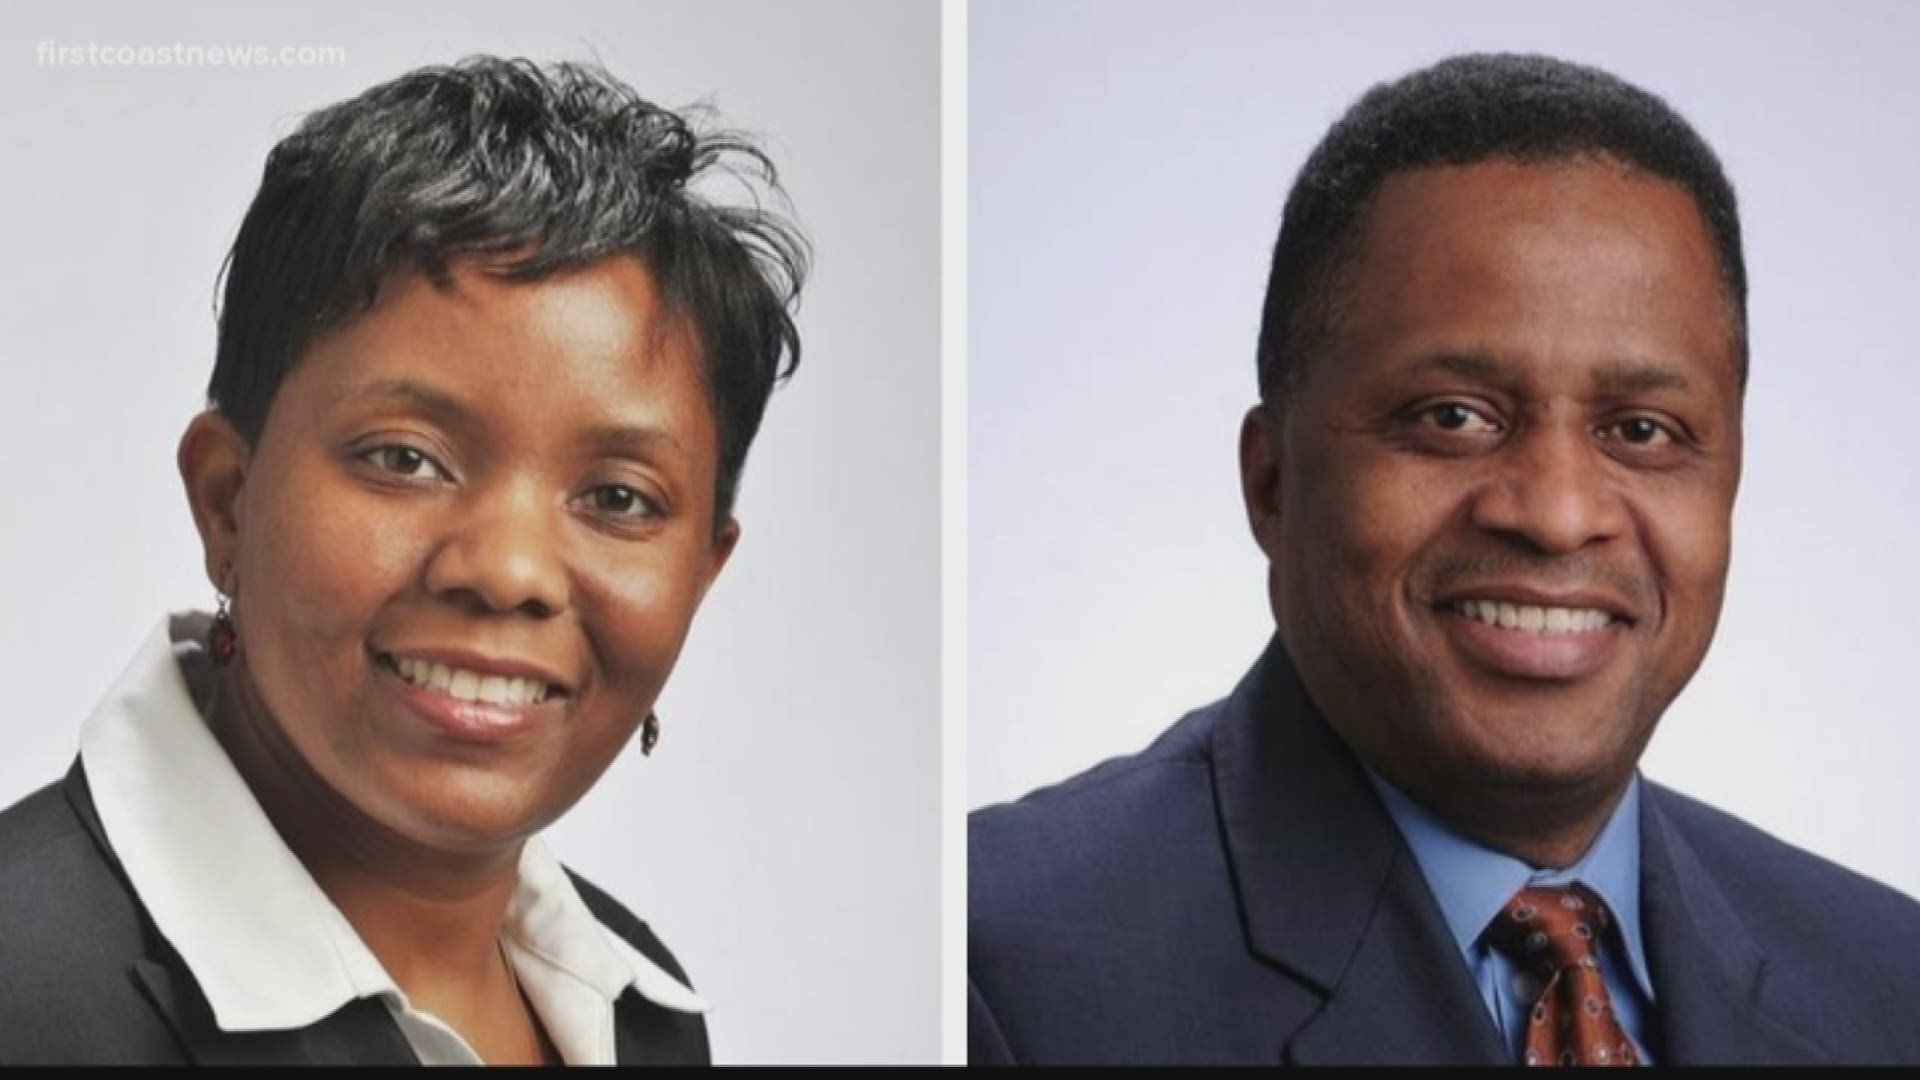 Jacksonville City Council members Reginald Brown and Katrina Brown have been indicted by a federal grand jury on 38 counts of conspiracy, mail and wire fraud.